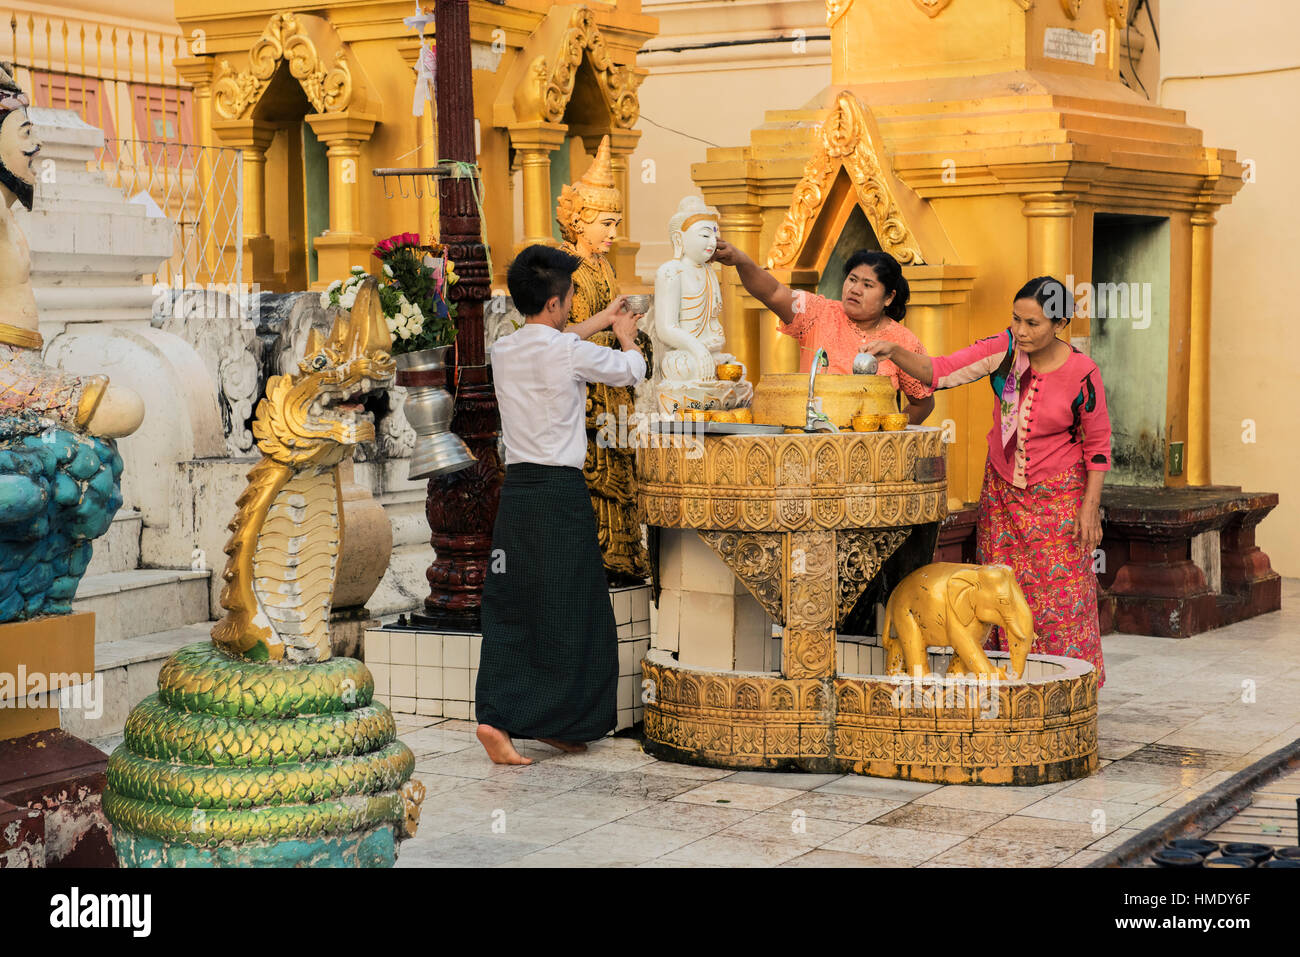 Devotees of the Buddha in traditional burmese dress worship at one of the Temples in the Shwedagon Pagoda Stock Photo